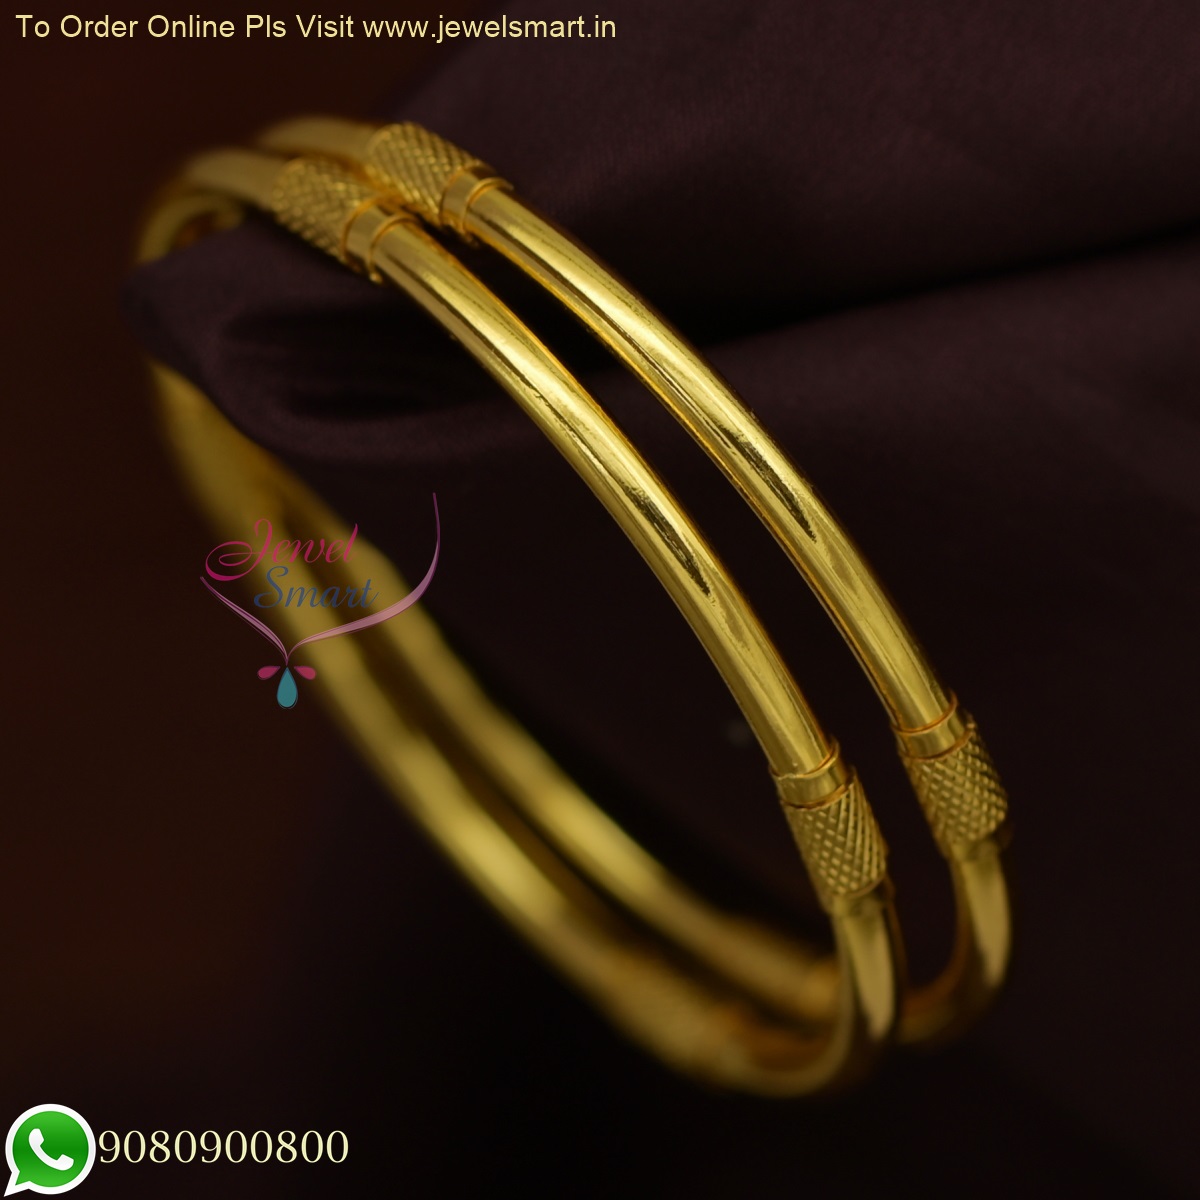 Smooth Ribbon Wrap One Gram Gold Bangles Daily Wear Jewellery B25332